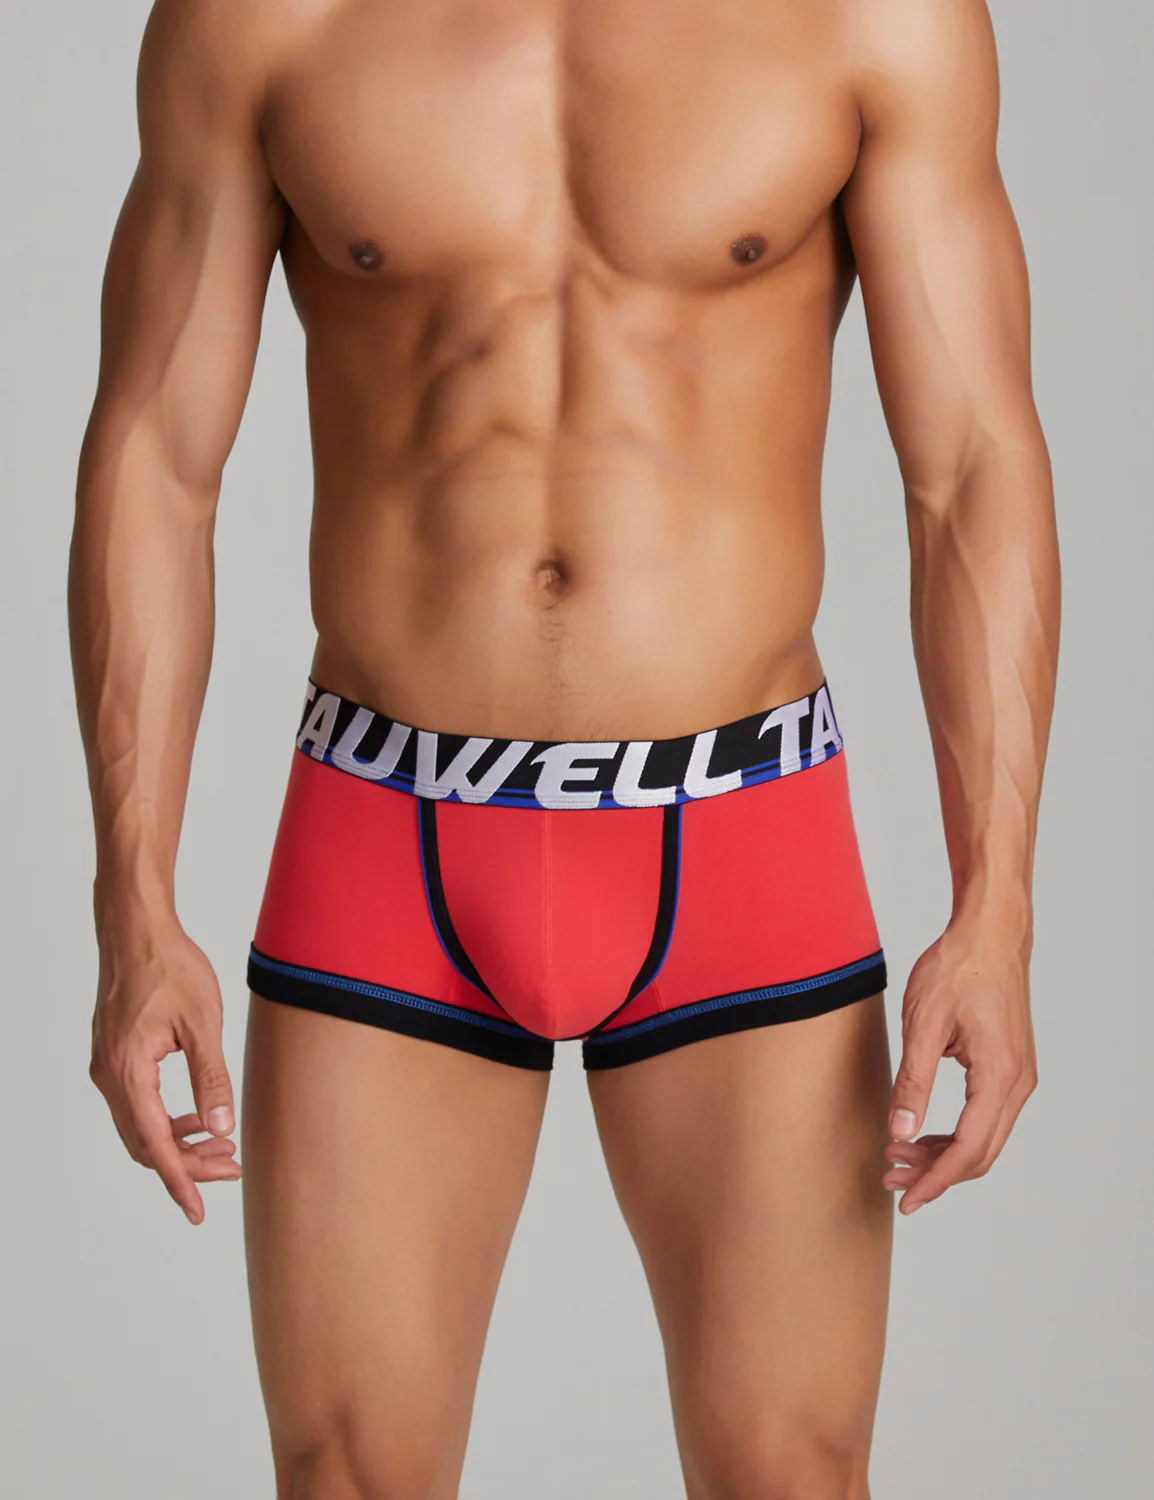 TAUWELL -  COLOURWAY CONTRAST BOXER BRIEFS